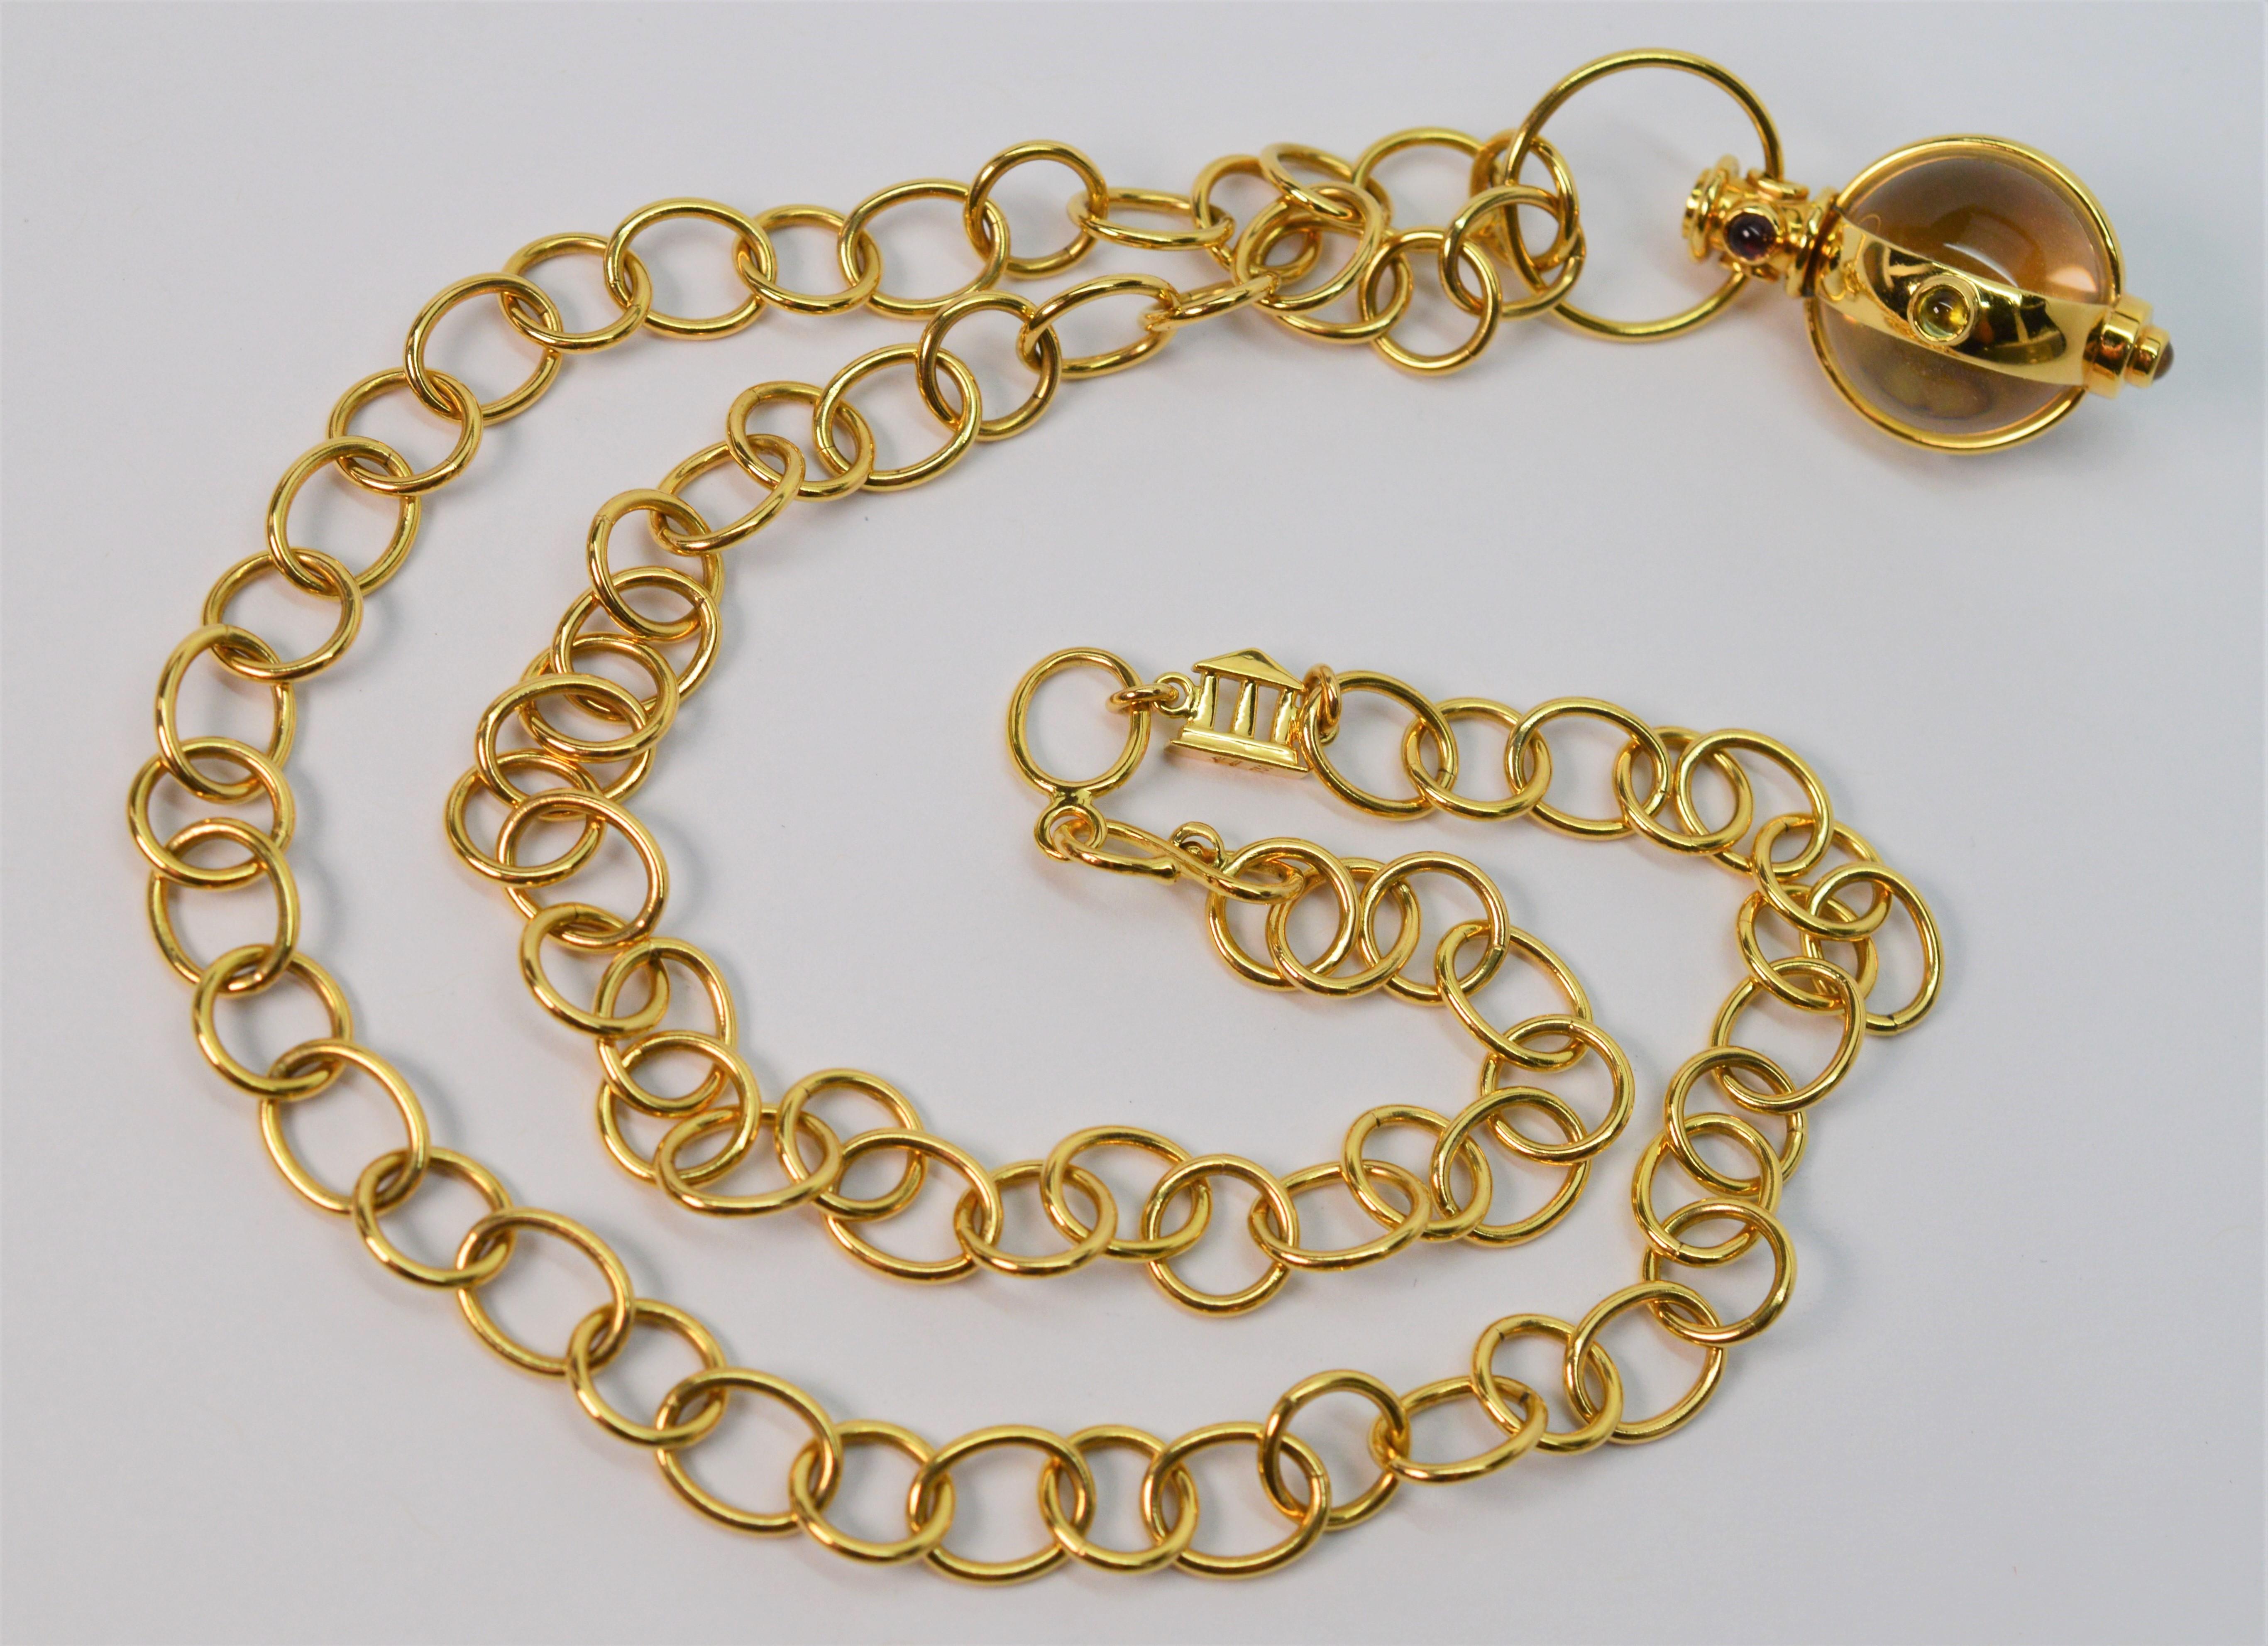 A timeless and iconic piece by designer Temple St. Clair with earth born and astronomical inspirations. Her custom eighteen 18K yellow gold Arno Chain was originally inspired by the reflections of flowing water. Composed of oval and round links,